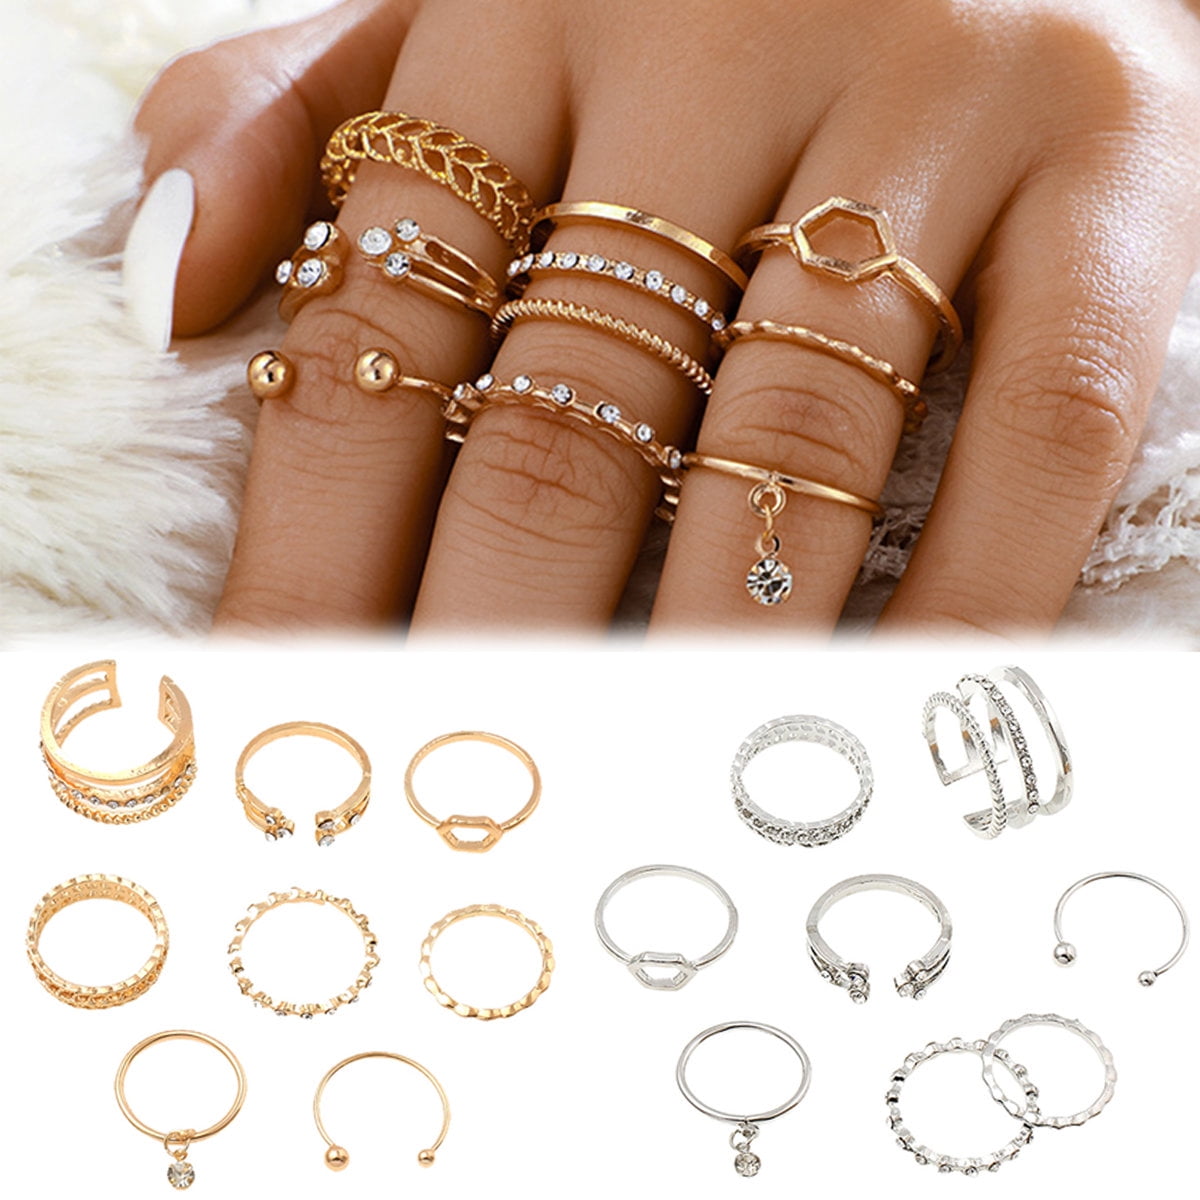 Dress Choice Stackable Dainty Gold Color Boho Rhinestones Rings Set Festival Bohemian Beach Vacation Summer Jewelry Knuckle Accessory Women Girls 1543da9b e08b 411a 9940 676780117683.b6f395a09f60b0ab8e19c45b6b906544